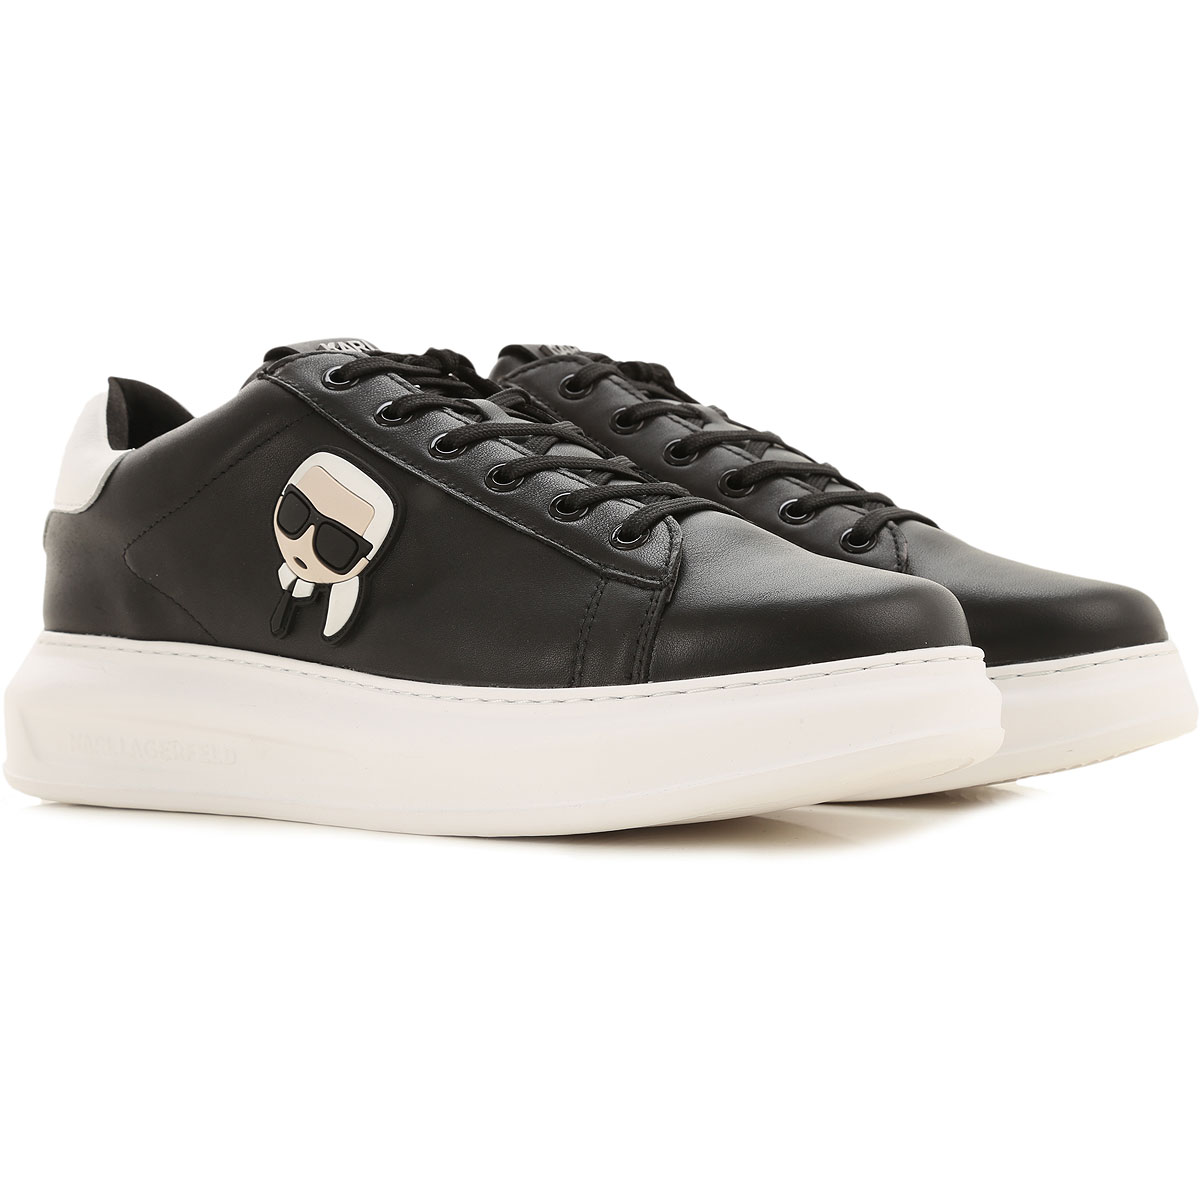 Mens Shoes Karl Lagerfeld, Style code: kl52530-000-